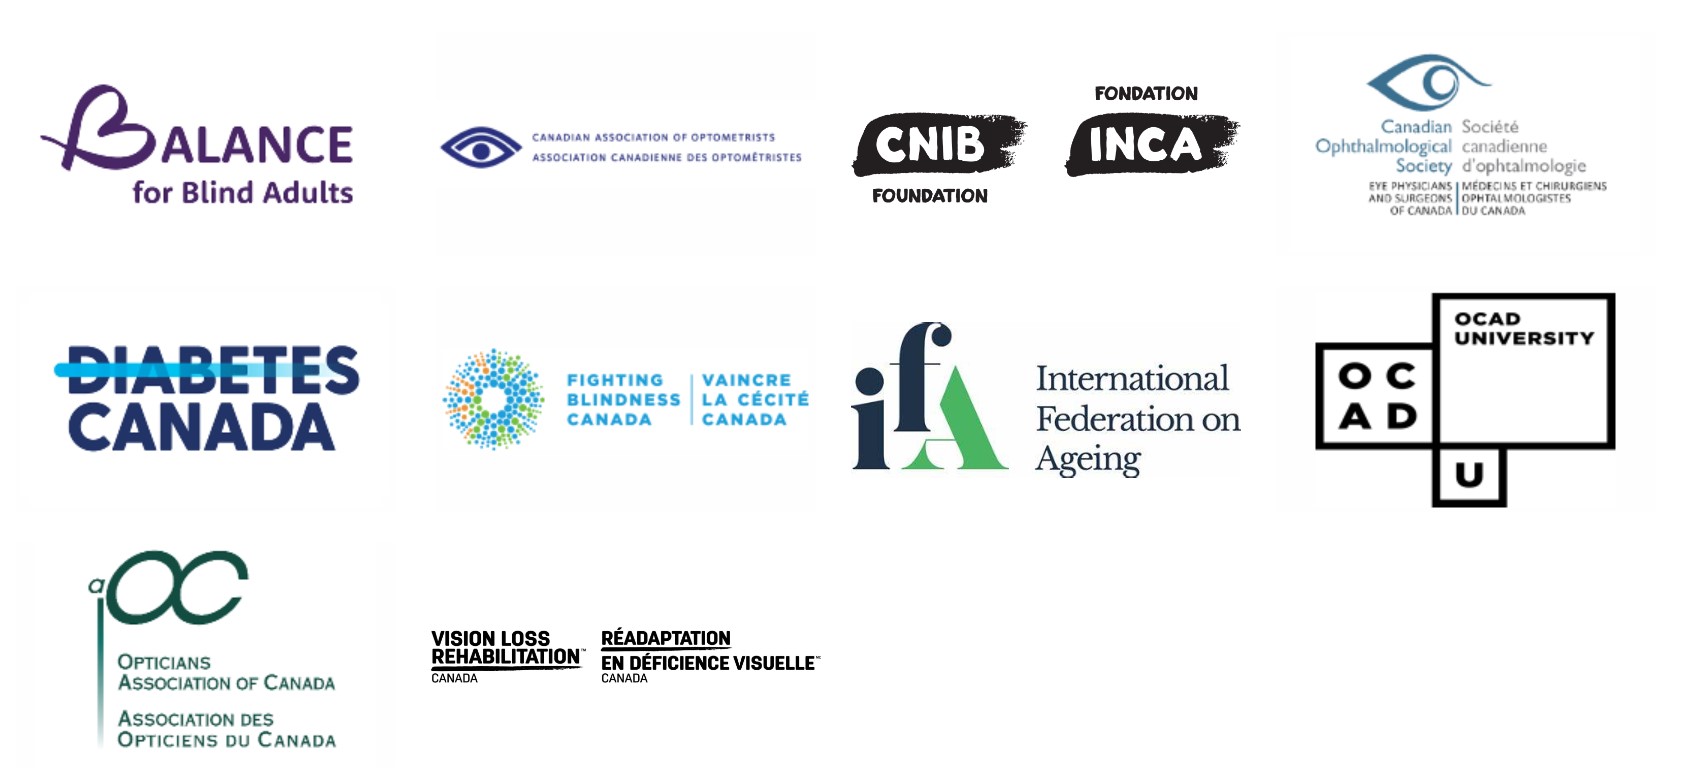 Canadian Council of the Blind Partners' Logos [Balance for Blind Adults, Canadian Association of Optometrists (CAO), CNIB, Canadian Ophthalmological Society (COS), Diabetes Canada, Fighting Blindness Canada (FBC), International Federaion on Ageing (IFA), OCAD University, Opticians Association of Canada, Vision Rehab Rehabilitation Canada]